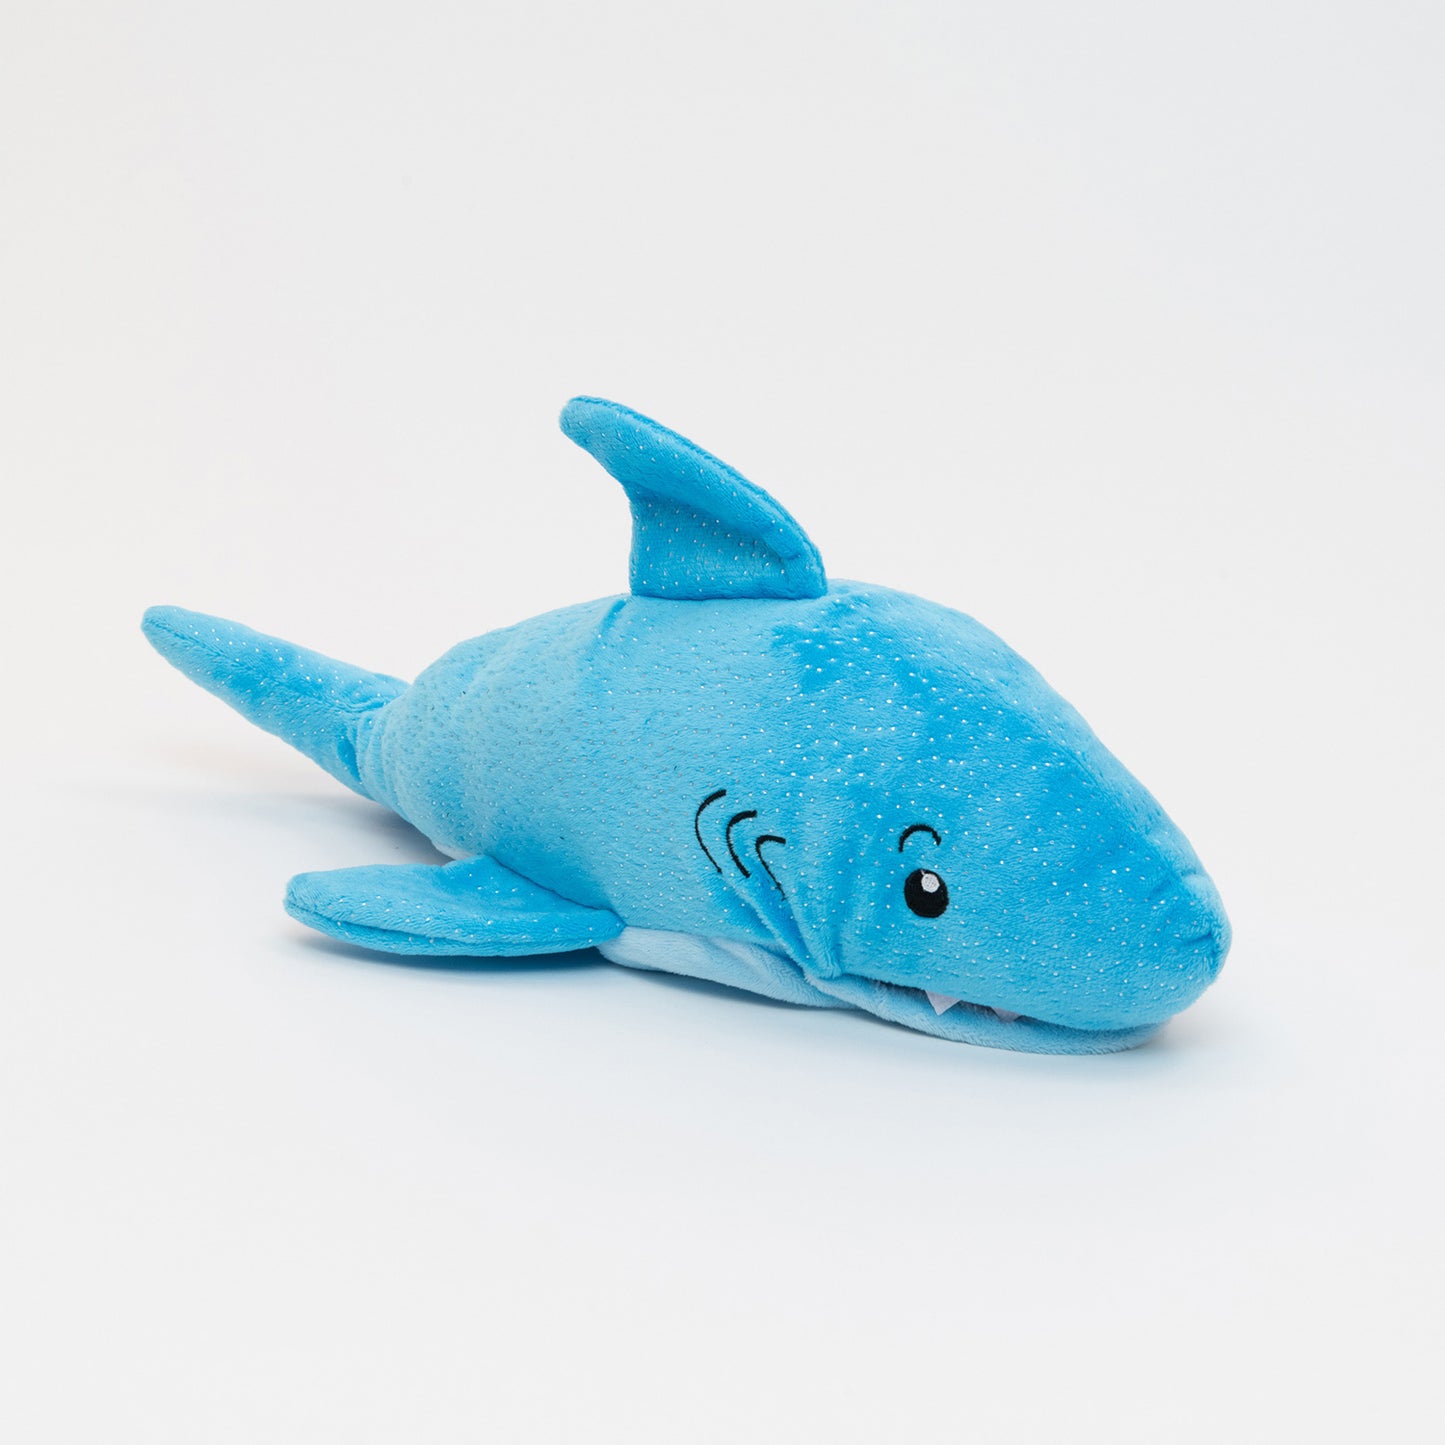 Playful Shark Hand Puppet. With a bright blue and silver spotted plush coat, stitched eyes and gills and a vibrant red mouth with plenty of sharp looking felt teeth in its movable mouth, soft fabrics and quality embroidered details.